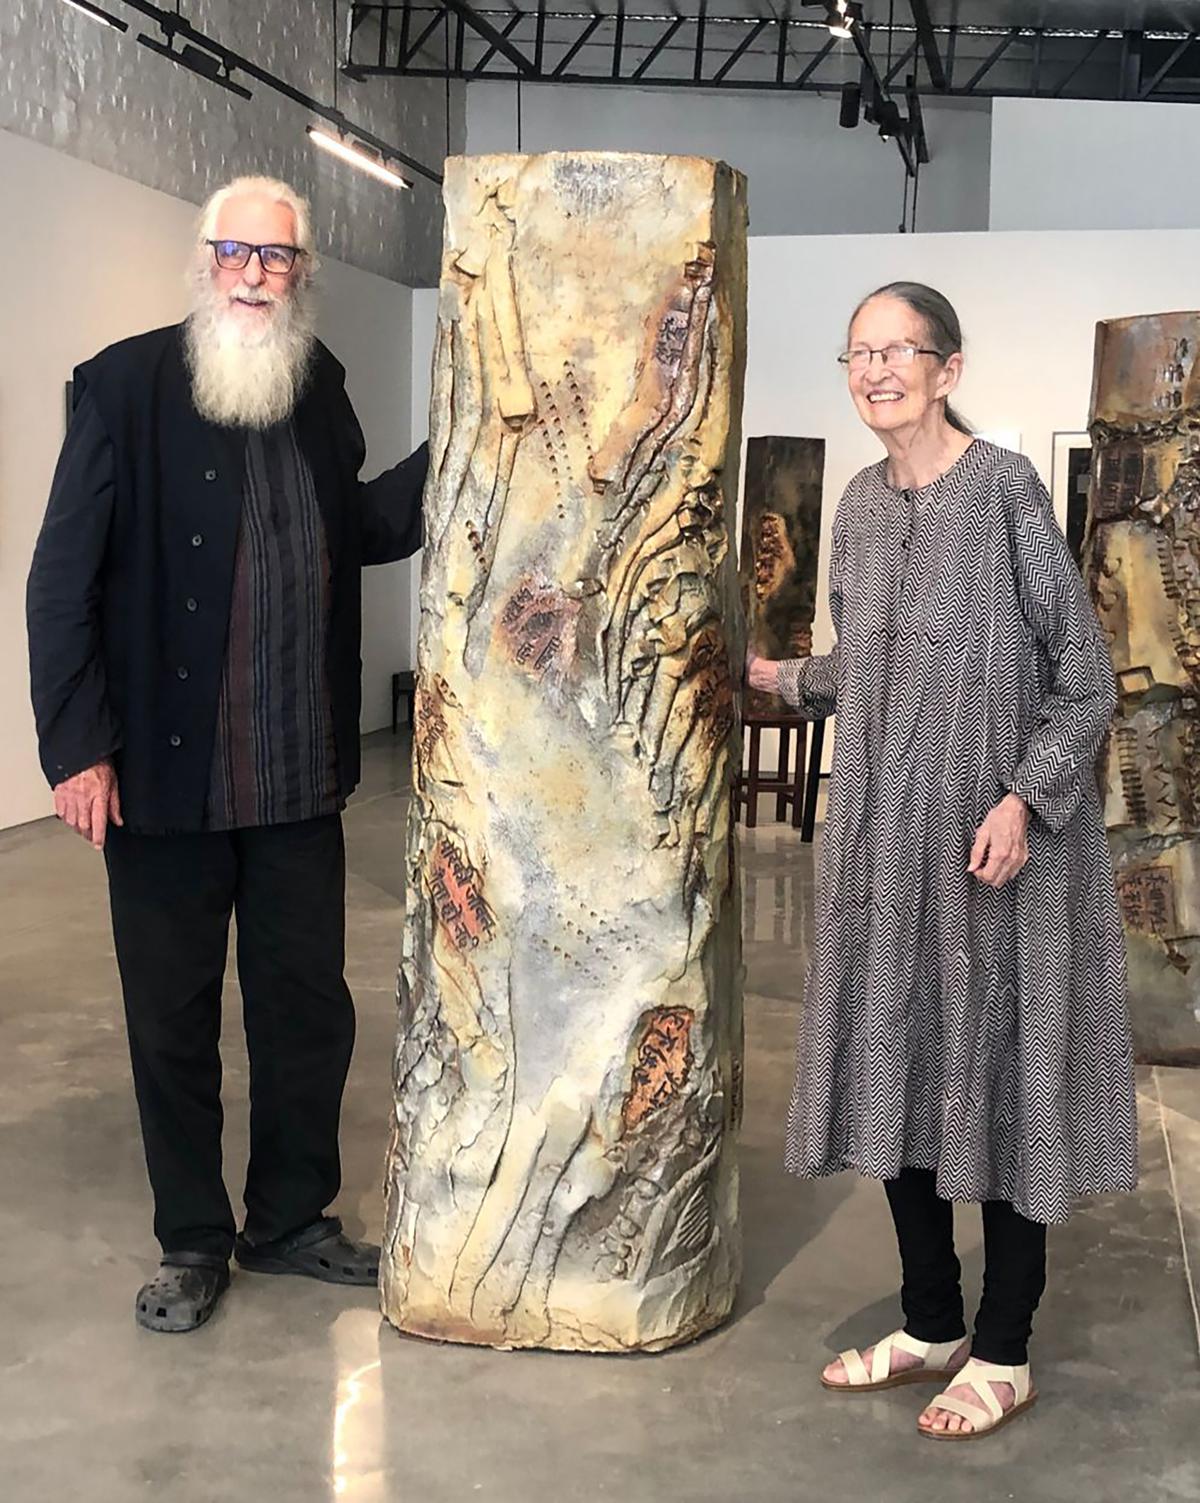  Deborah with partner Ray Meeker at one of his exhibitions